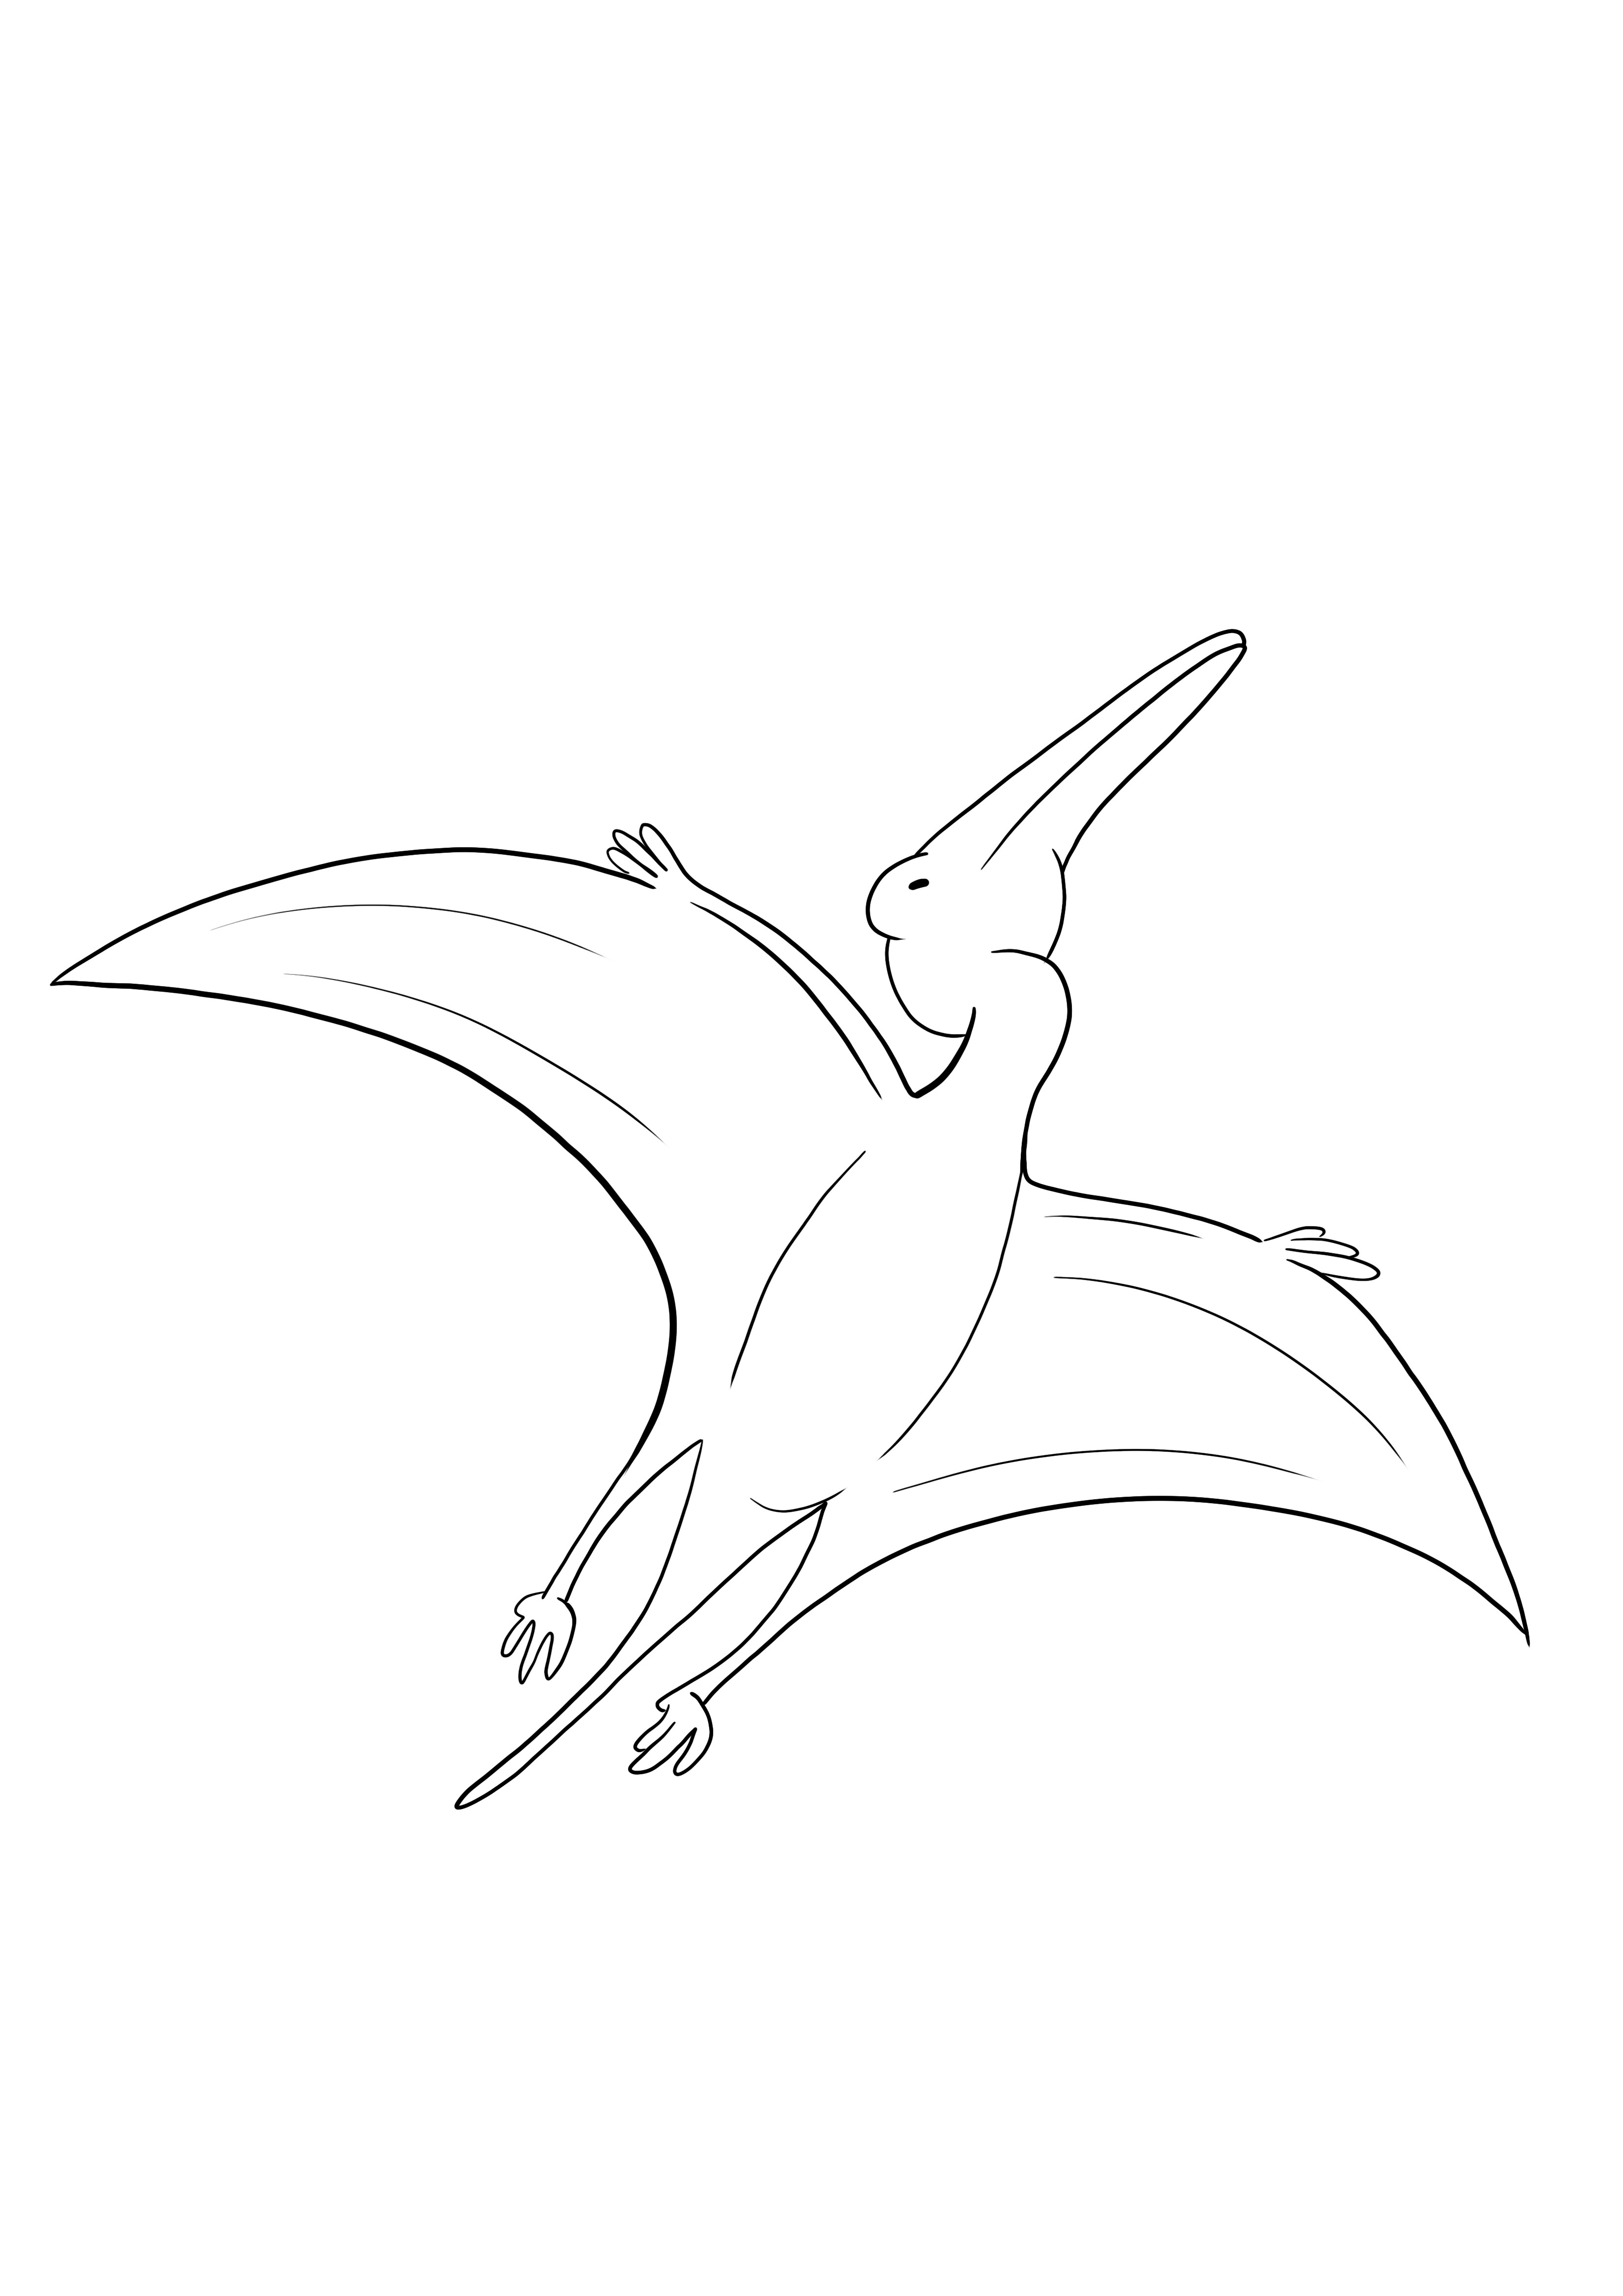 Flying pterodactyl for free downloading and coloring image